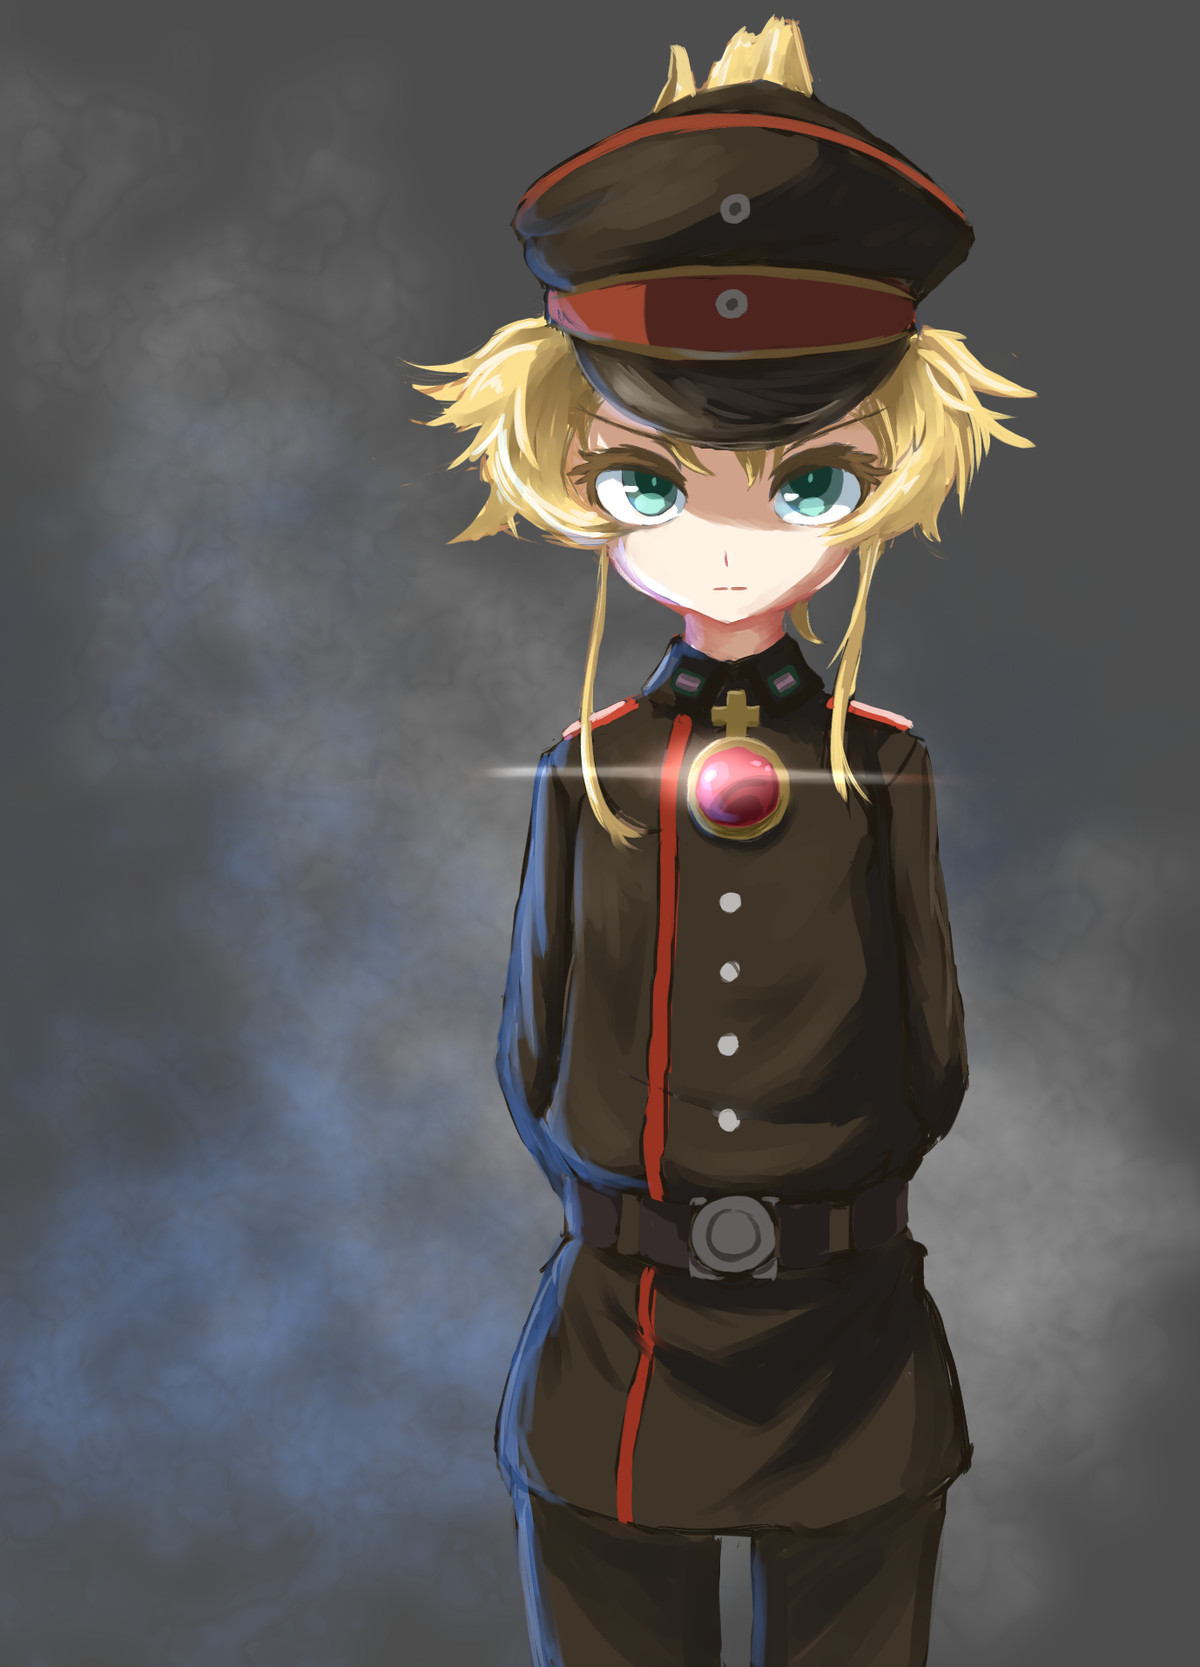 Daily Tanya - 960: Class Picture. join list: DailyTanya (592 subs)Mention History Source: .